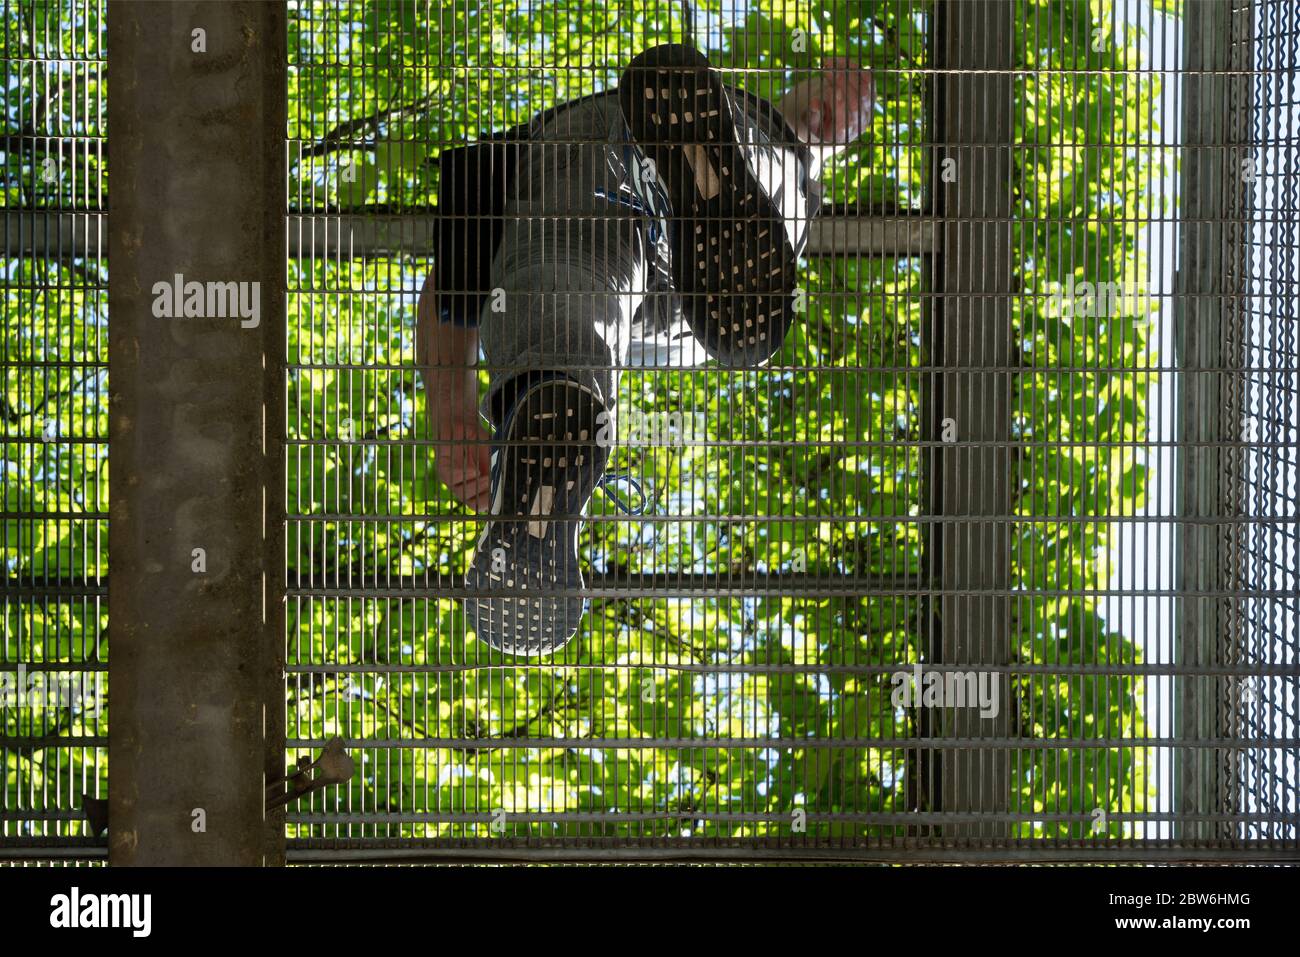 the passage of a man in a metal walkway shot from below Stock Photo